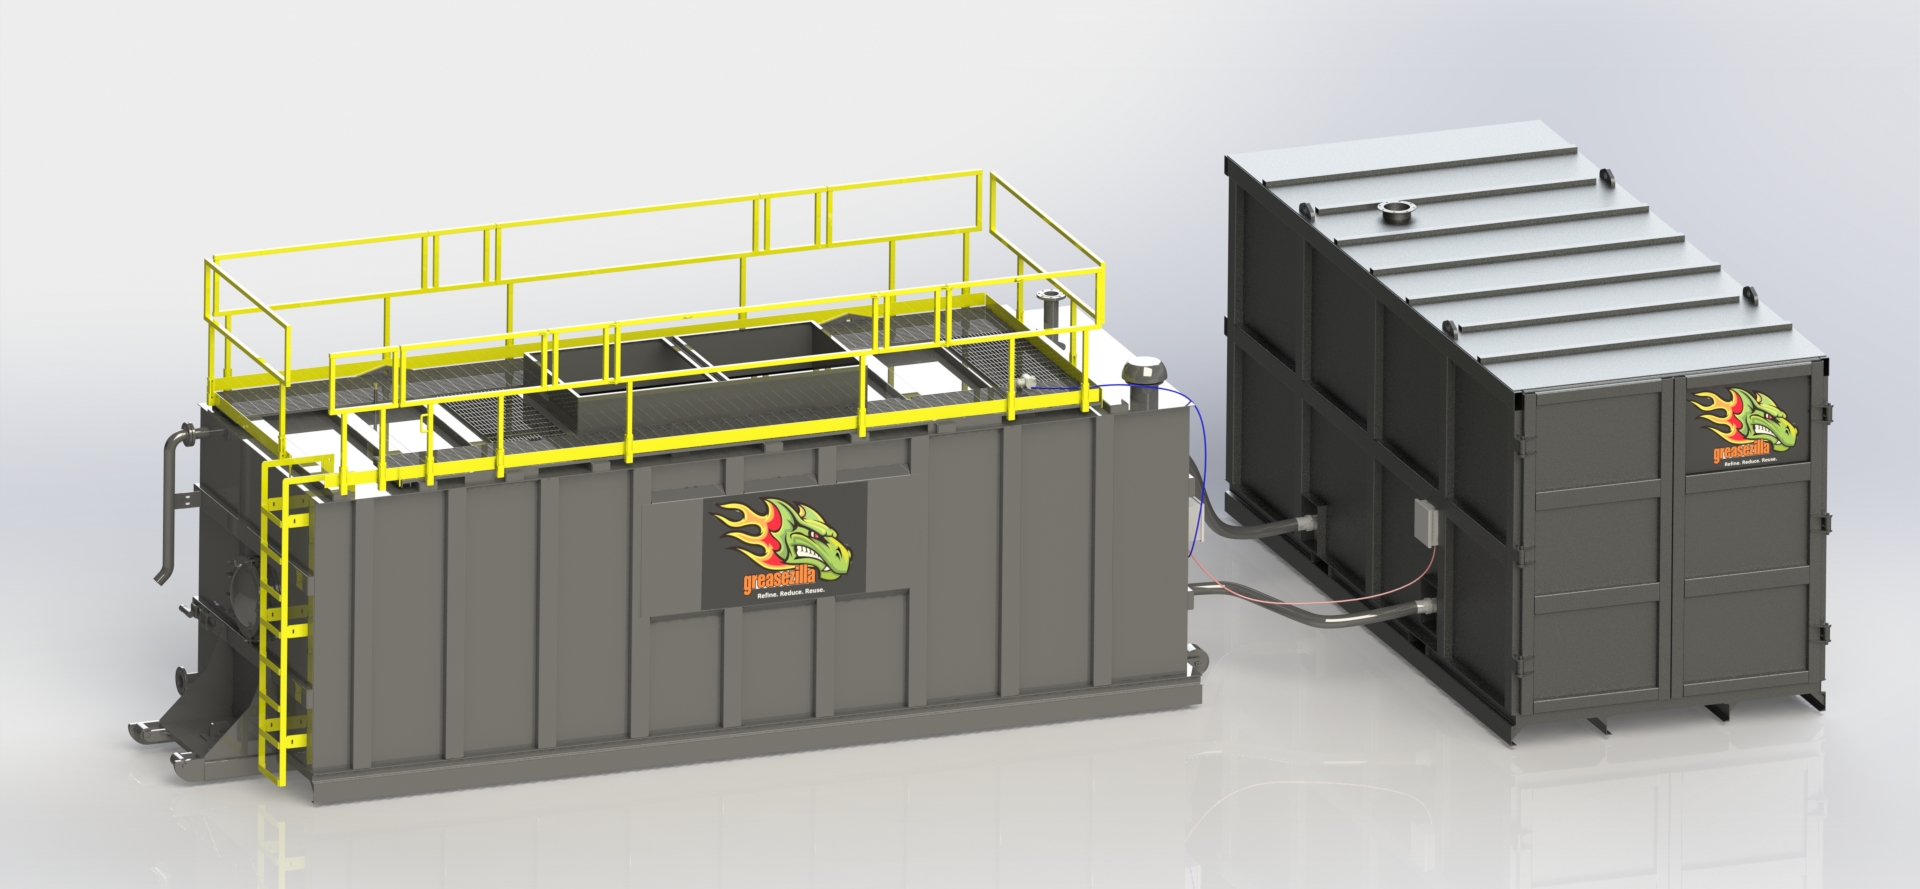 Designed for both interior and exterior placement, the modular Greasezilla FOG separation system is scalable in 10,000-gallon processing modules.